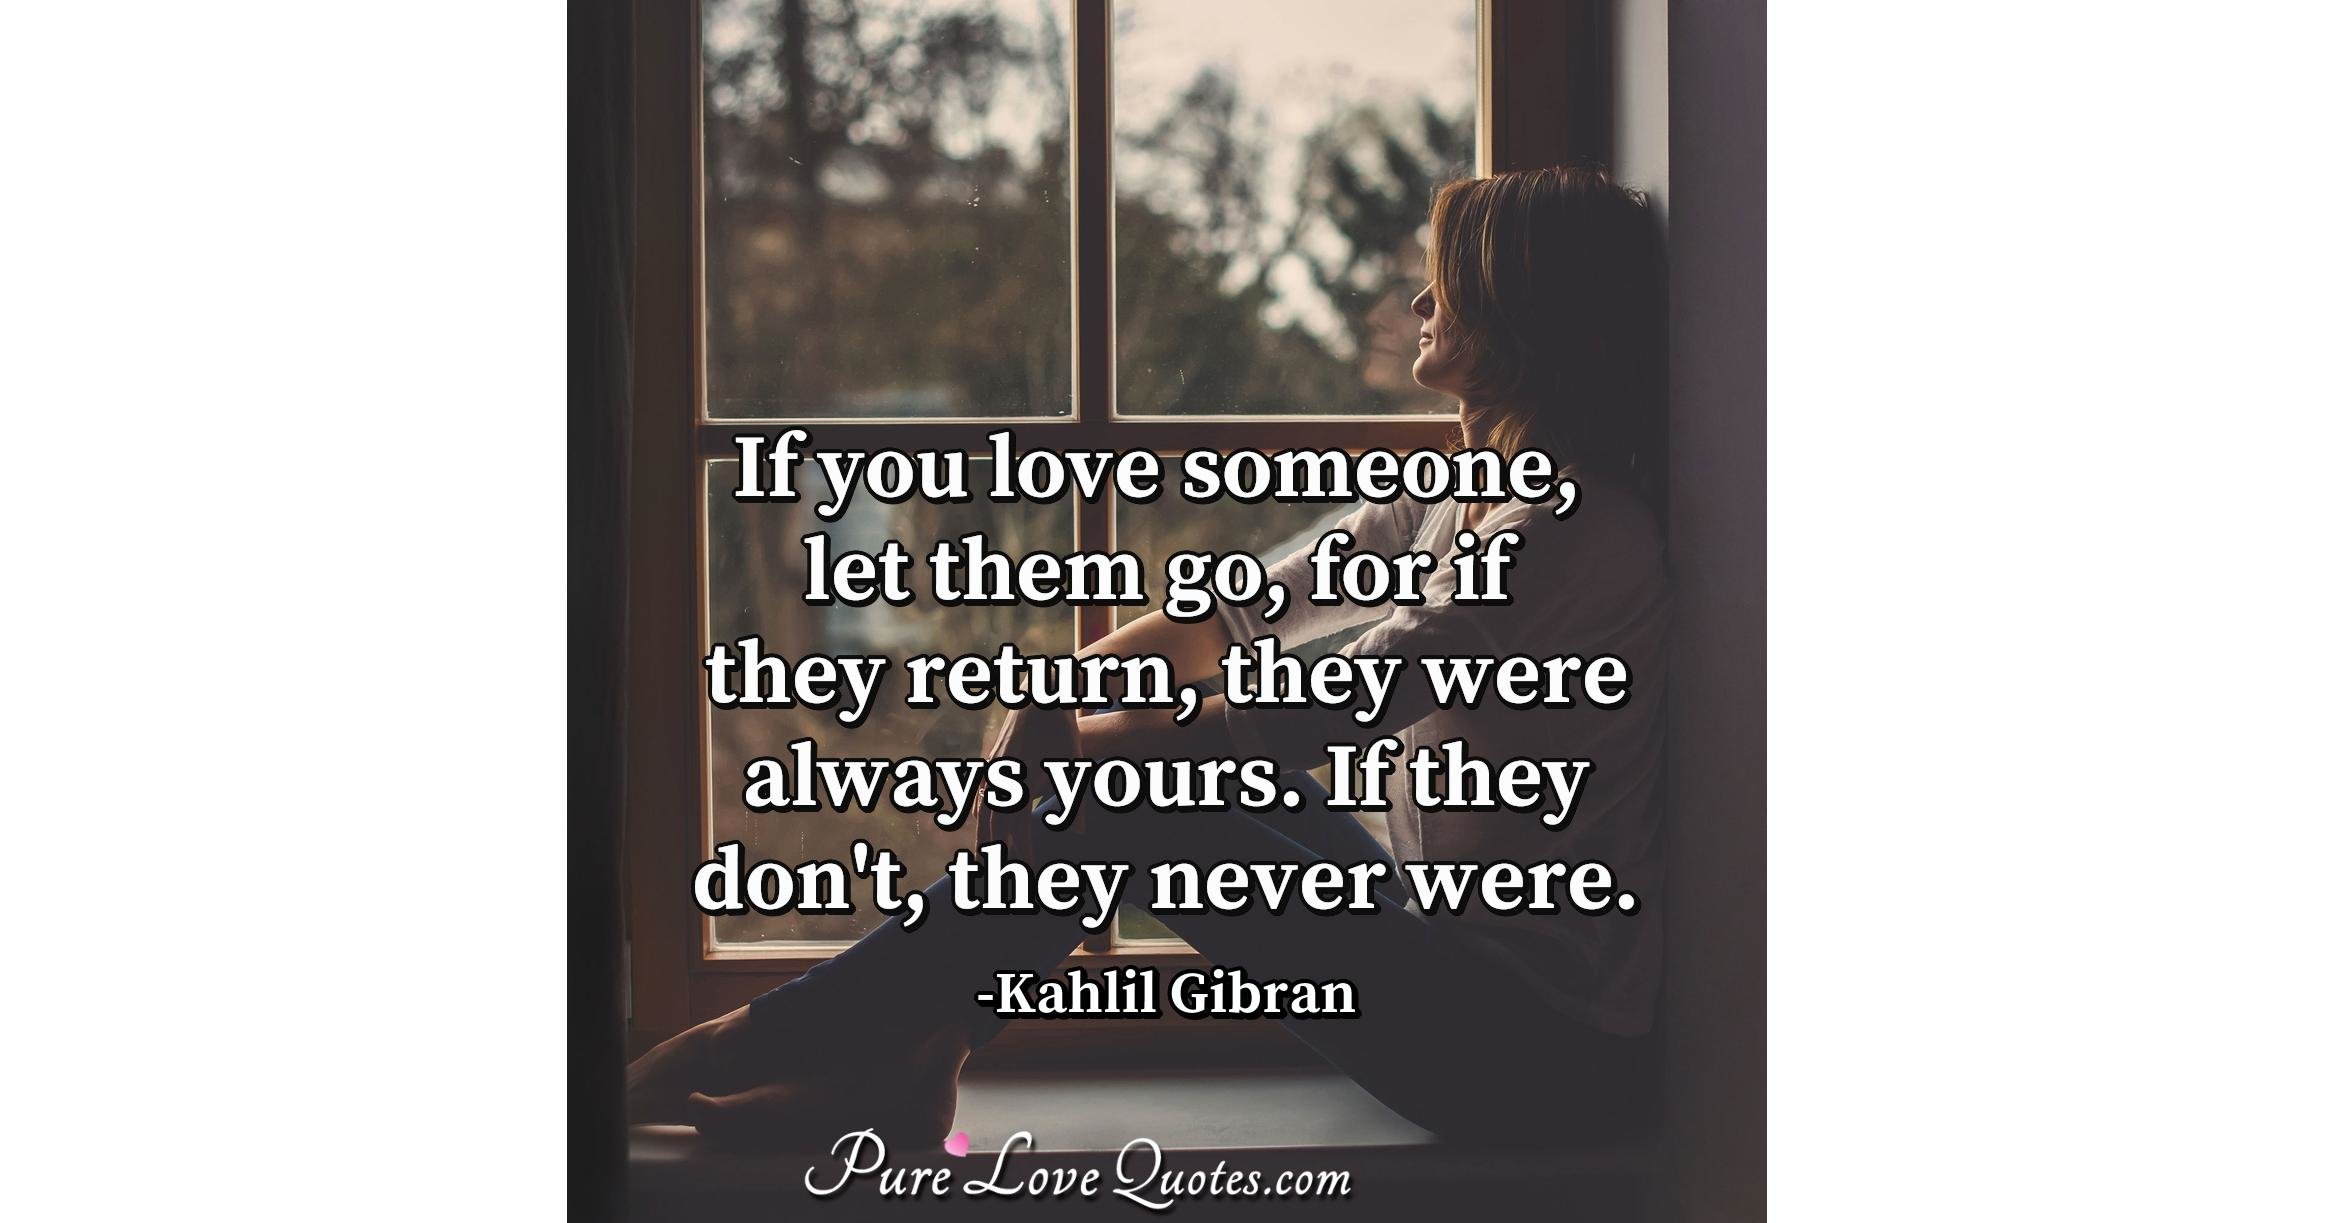 If you love someone, let them go, for if they return, they were always